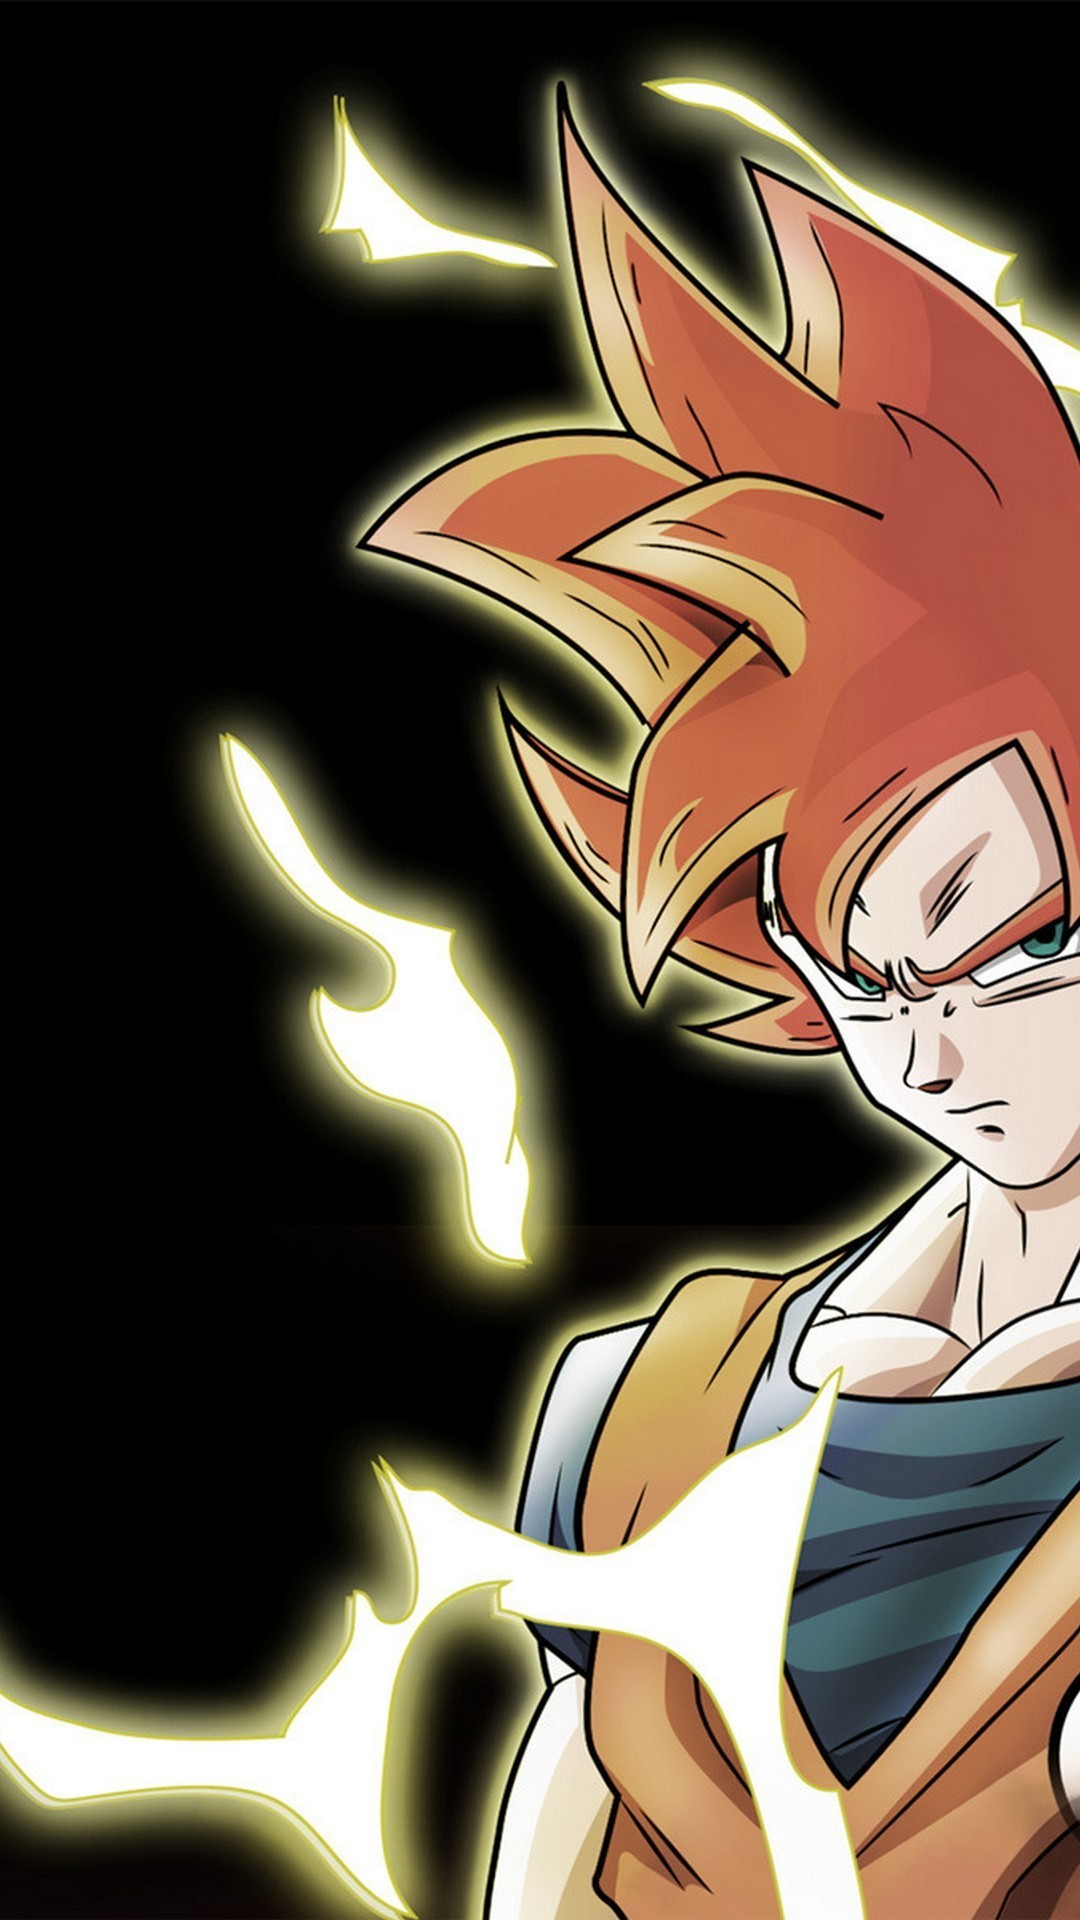 Goku Super Saiyan God Wallpaper Mobile with high-resolution 1080x1920 pixel. You can use and set as wallpaper for Notebook Screensavers, Mac Wallpapers, Mobile Home Screen, iPhone or Android Phones Lock Screen